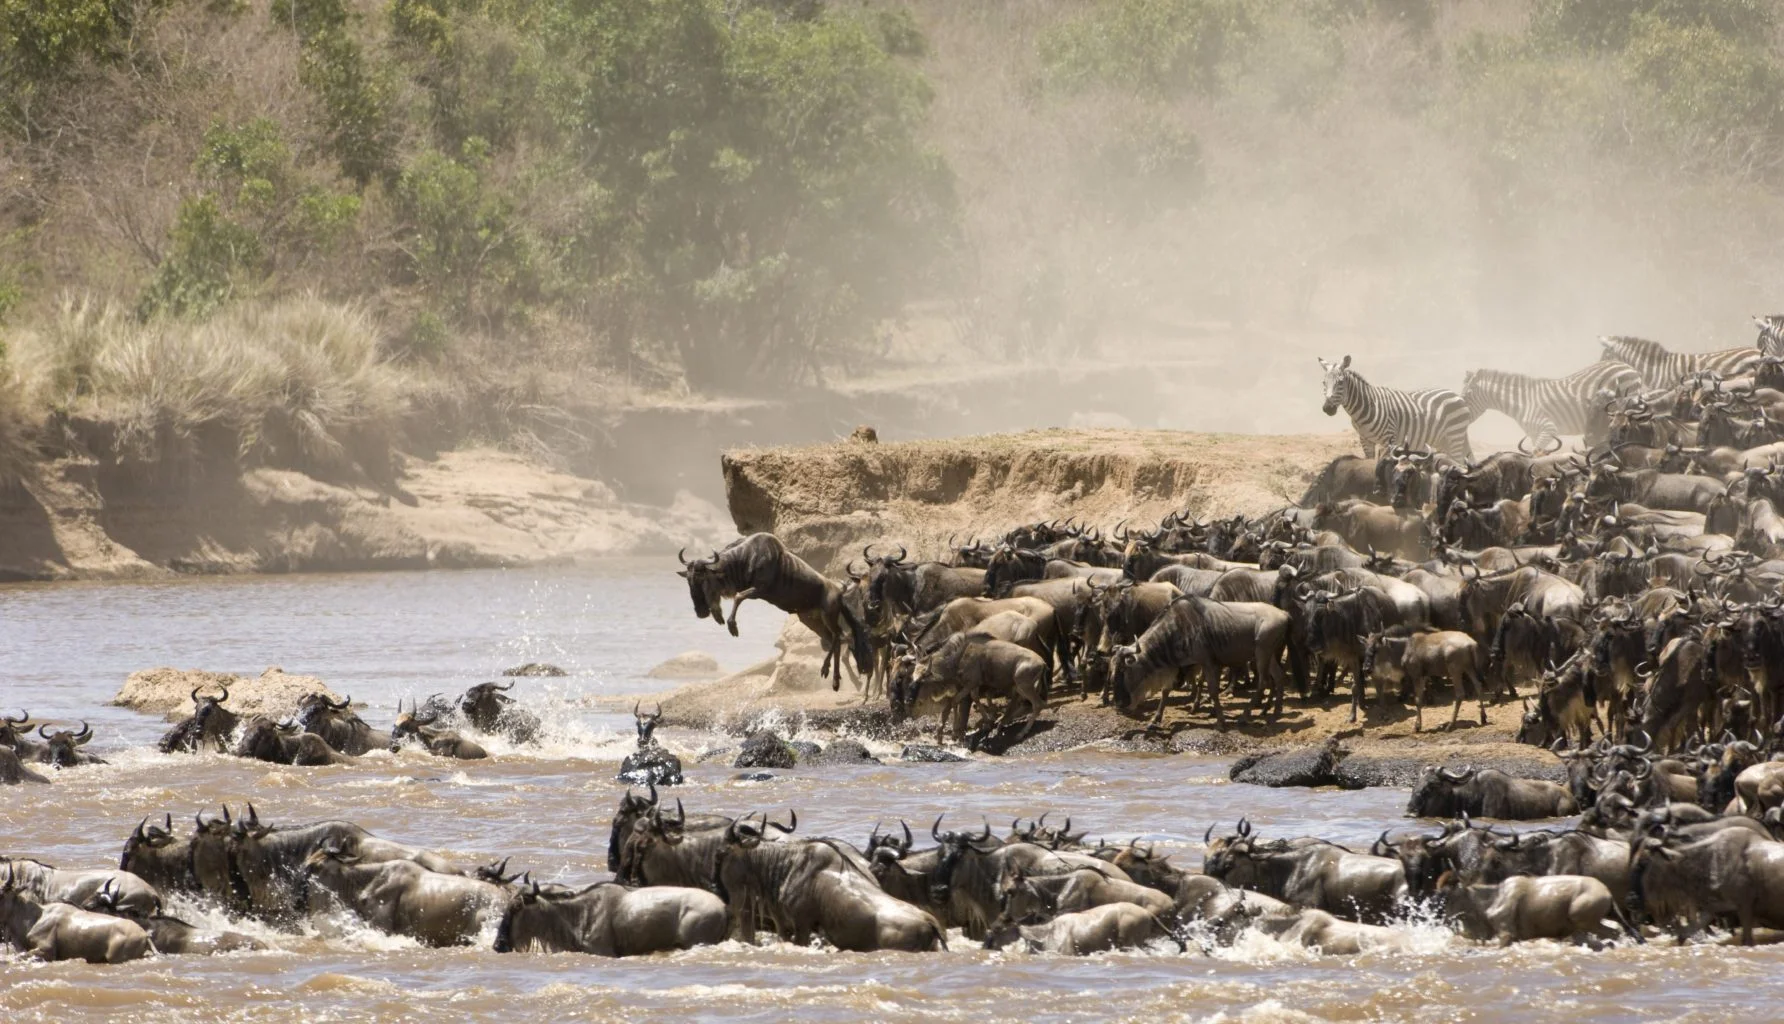 The great migration in Serengeti National Park, Tanzania. Serengeti wildebeest migration explained with moving map. Complete Guide to a Wildebeest Migration Safari, 4-Days Serengeti Migration Safari, 8 Must-Have Items to Take for Wildebeest Migration Safari, 8 Days Serengeti Migration Safari, Best Masai Mara Safari Tour Deals, Tips for Planning an African Great Migration Safari, 10 Reasons Why You Should See The Great Migration Safari in Tanzania, Tips for Planning Your Wildebeest Migration Safari, Ultimate Complete Guide to Great Serengeti Wildebeests Migration., Tanzania in August, ultimate Tanzania safari, Best Things to Do in Serengeti National Park, Interesting Facts About the Serengeti National Park, 10 Reasons Why You Should Visit the Serengeti National Park, Climate and Weather in Serengeti National Park, Great Migration River Crossing, Serengeti in August, Witness the Great Migration in Serengeti in July